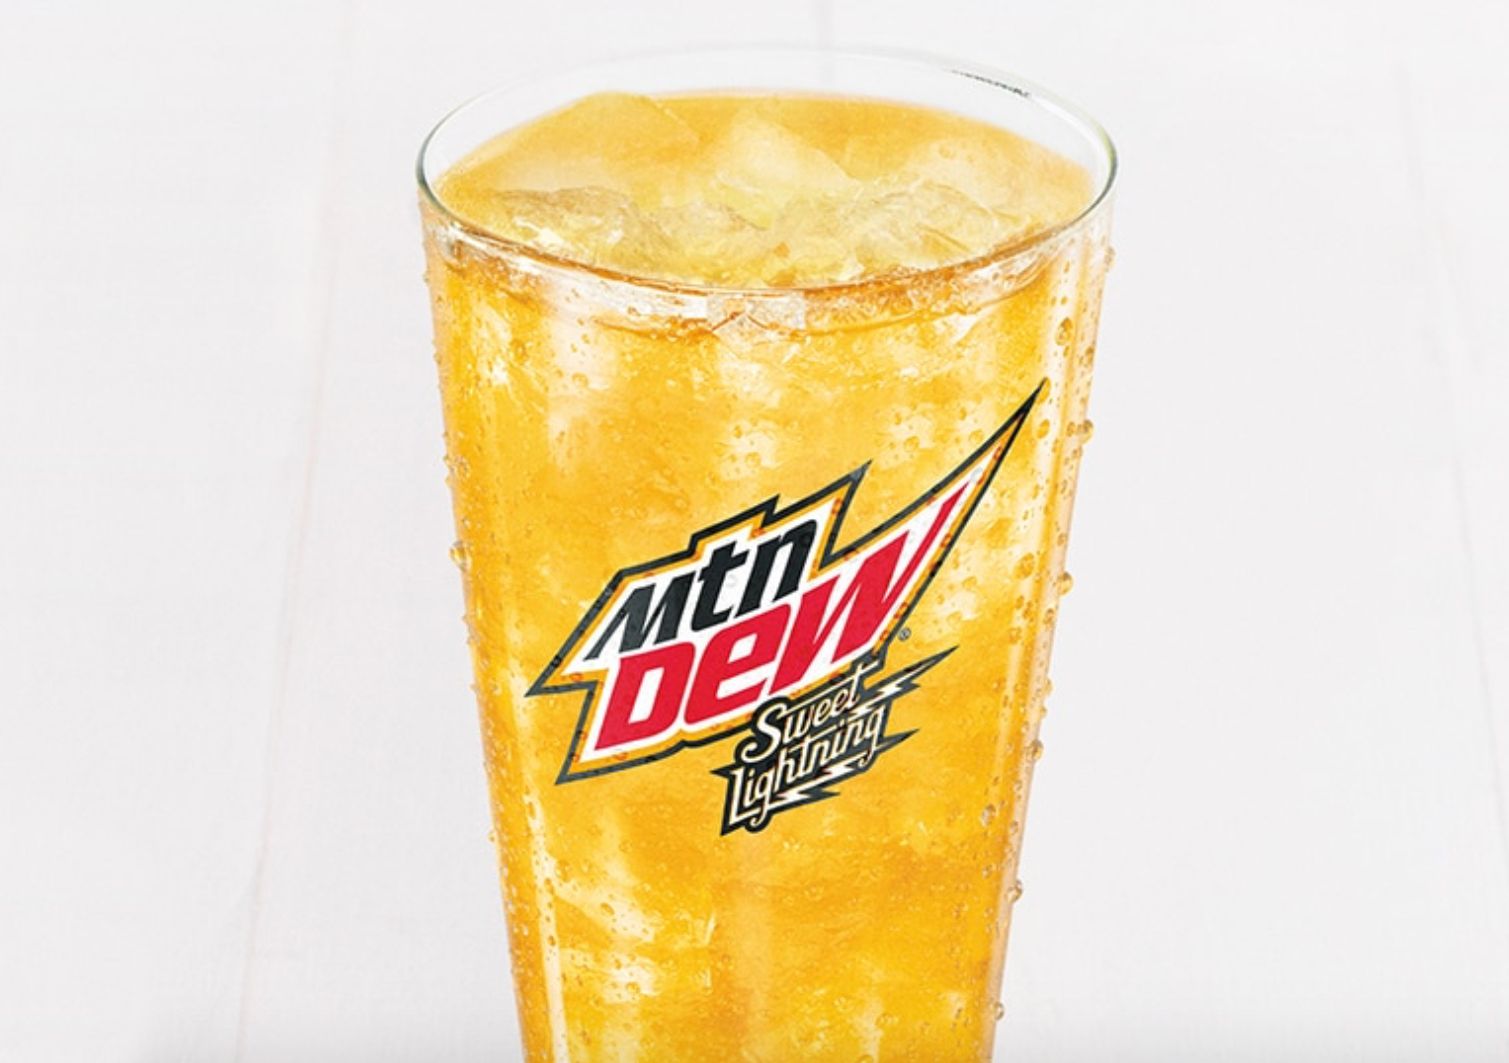 Kentucky Fried Chicken and Mountain Dew have Partnered to Bring KFC Fans Mountain Dew's Sweet Lightning  